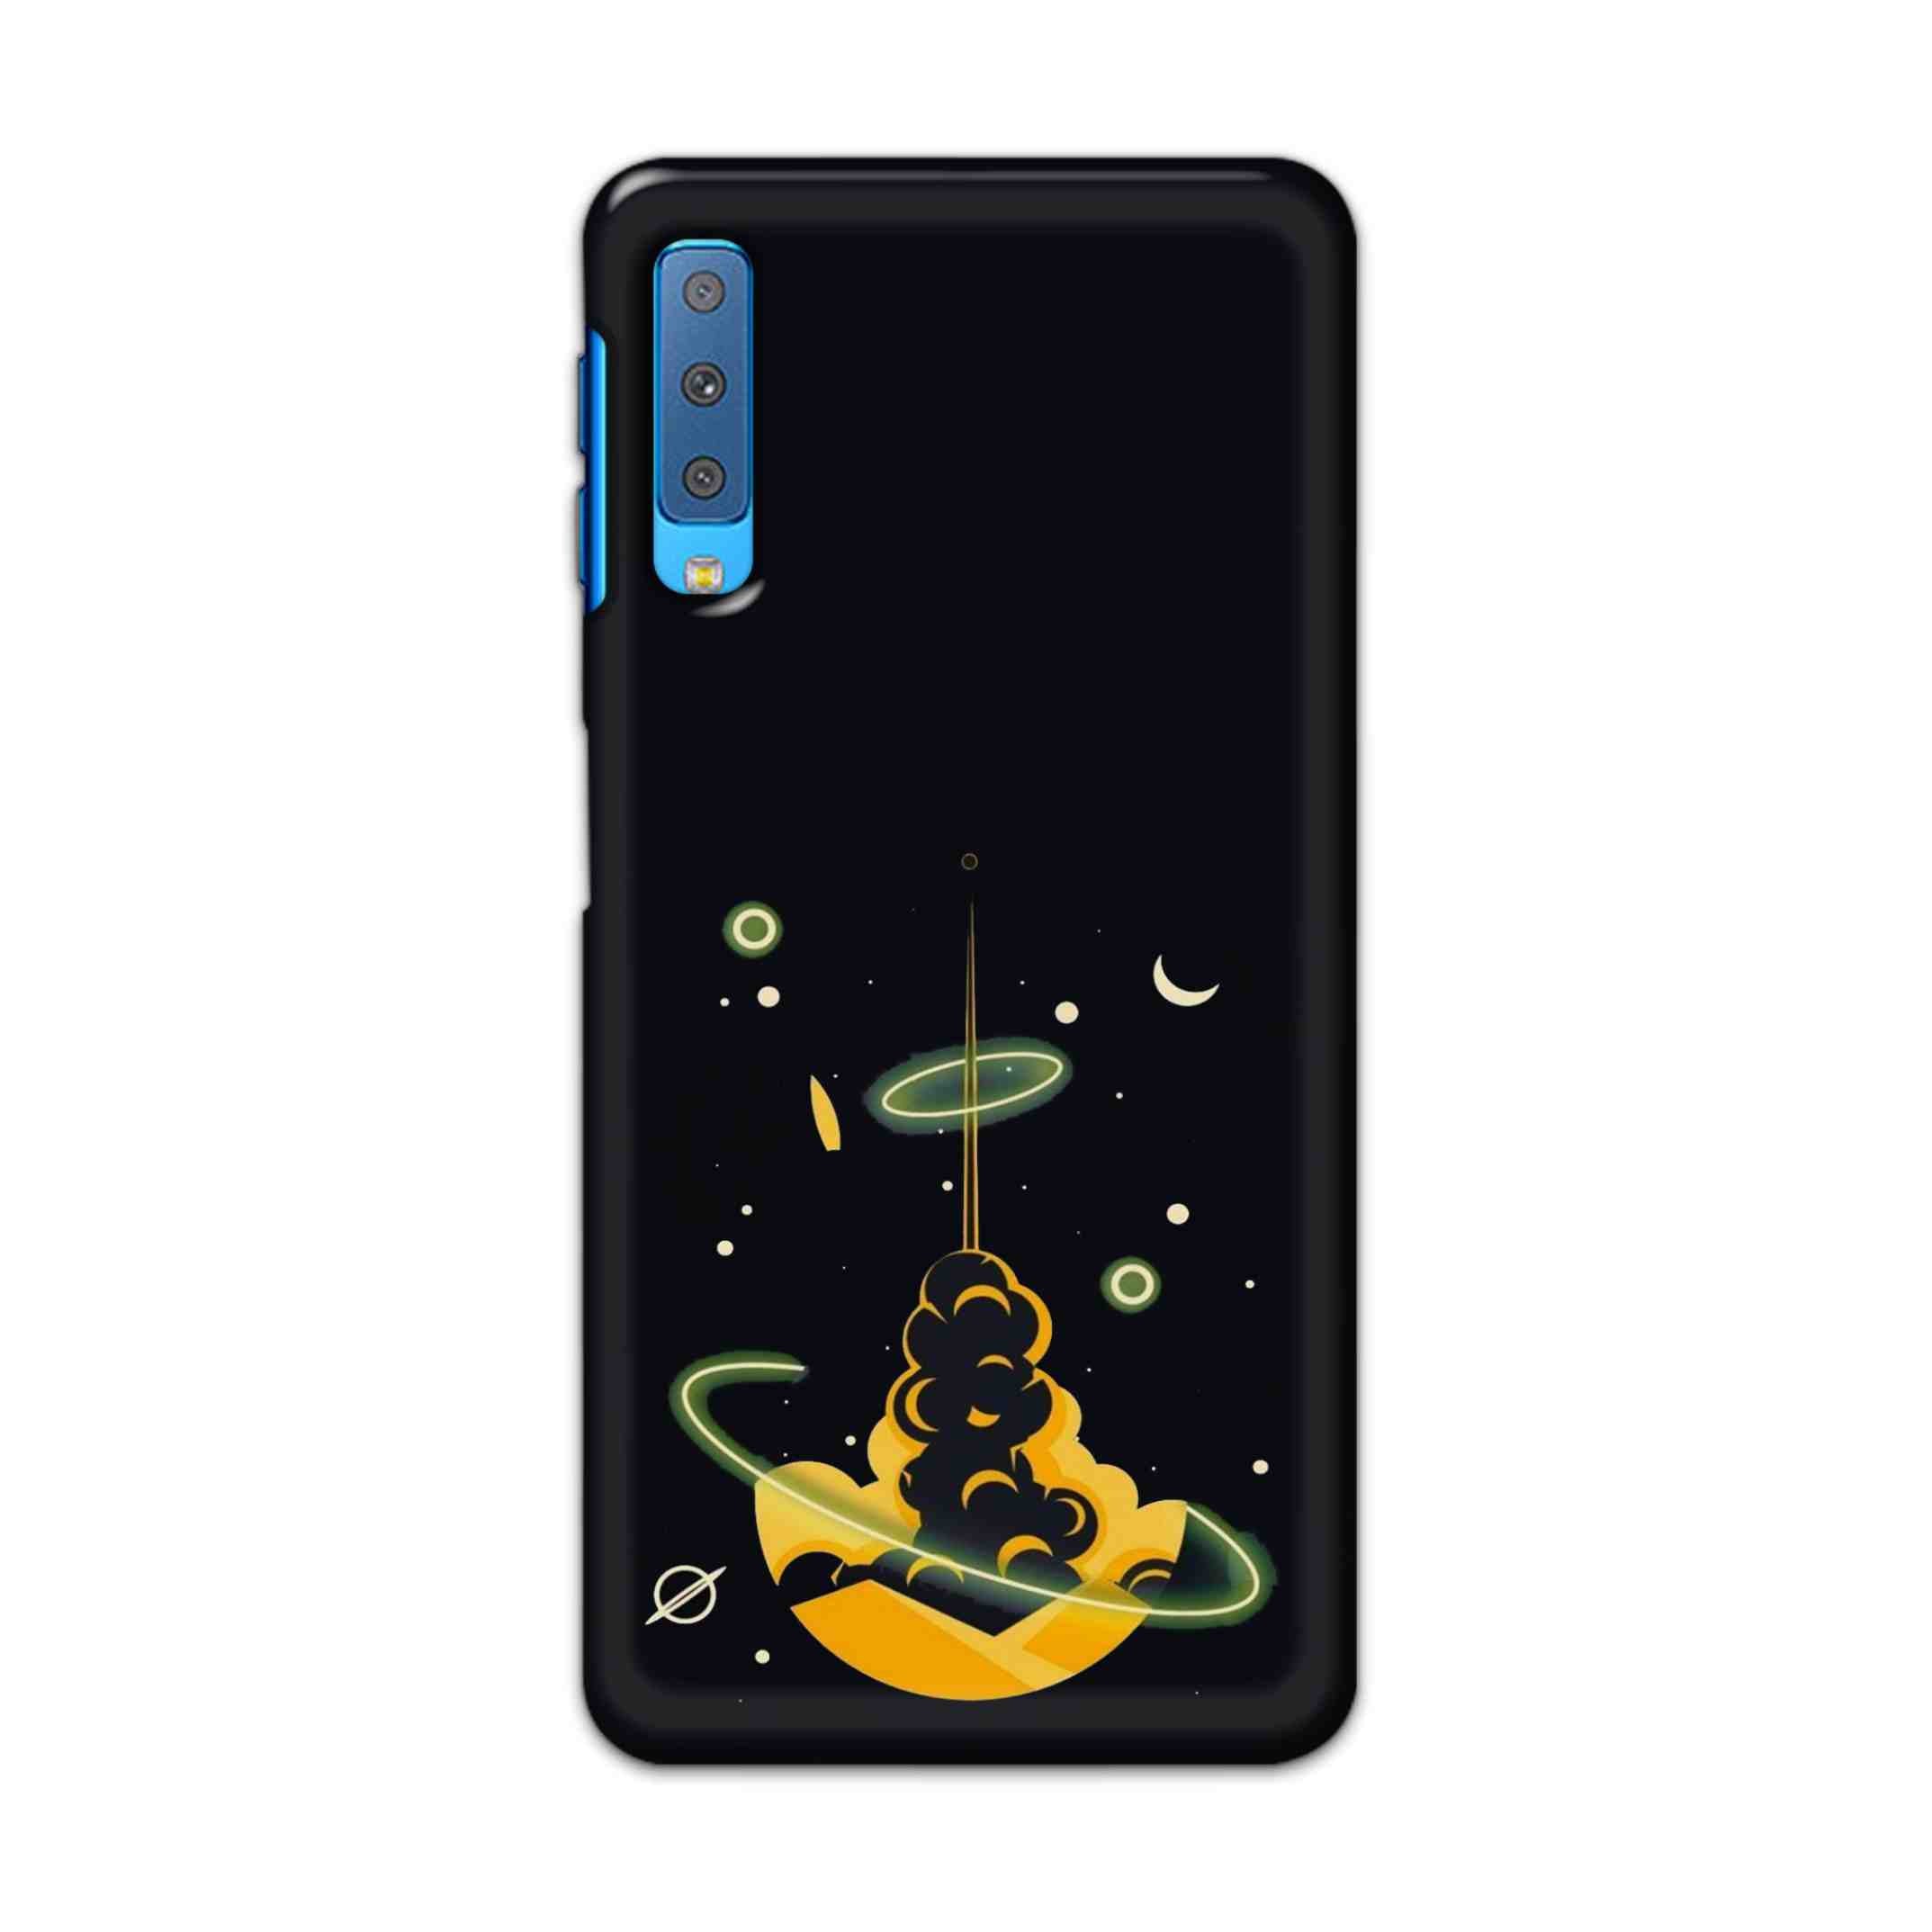 Buy Moon Hard Back Mobile Phone Case Cover For Samsung Galaxy A7 2018 Online